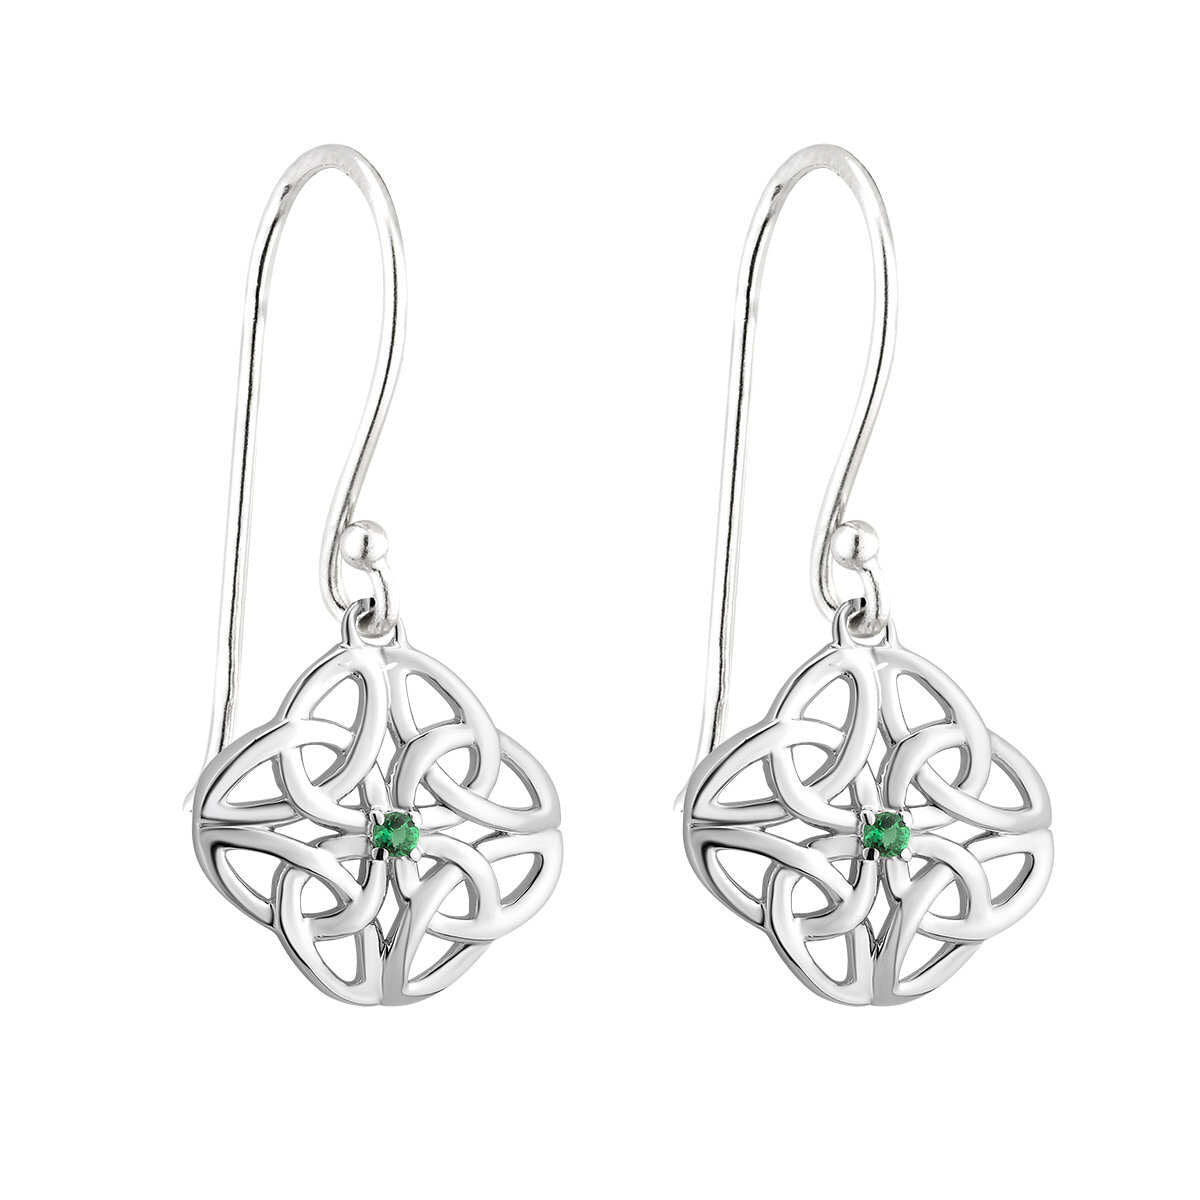 Sterling Silver Celtic Knotwork Drop Earrings with Emerald